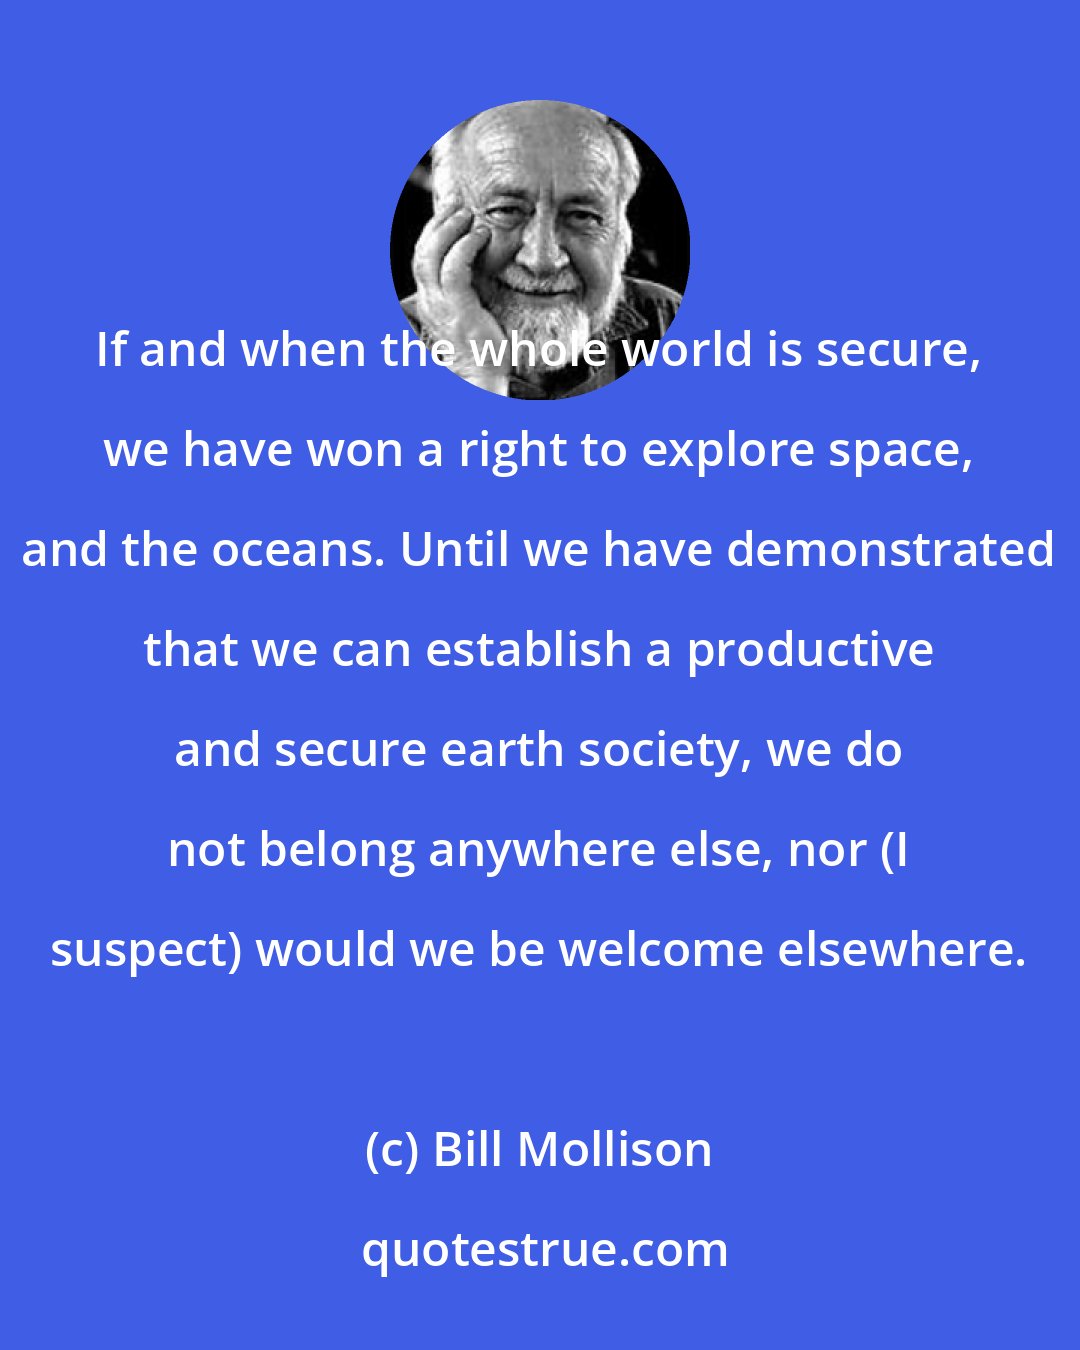 Bill Mollison: If and when the whole world is secure, we have won a right to explore space, and the oceans. Until we have demonstrated that we can establish a productive and secure earth society, we do not belong anywhere else, nor (I suspect) would we be welcome elsewhere.